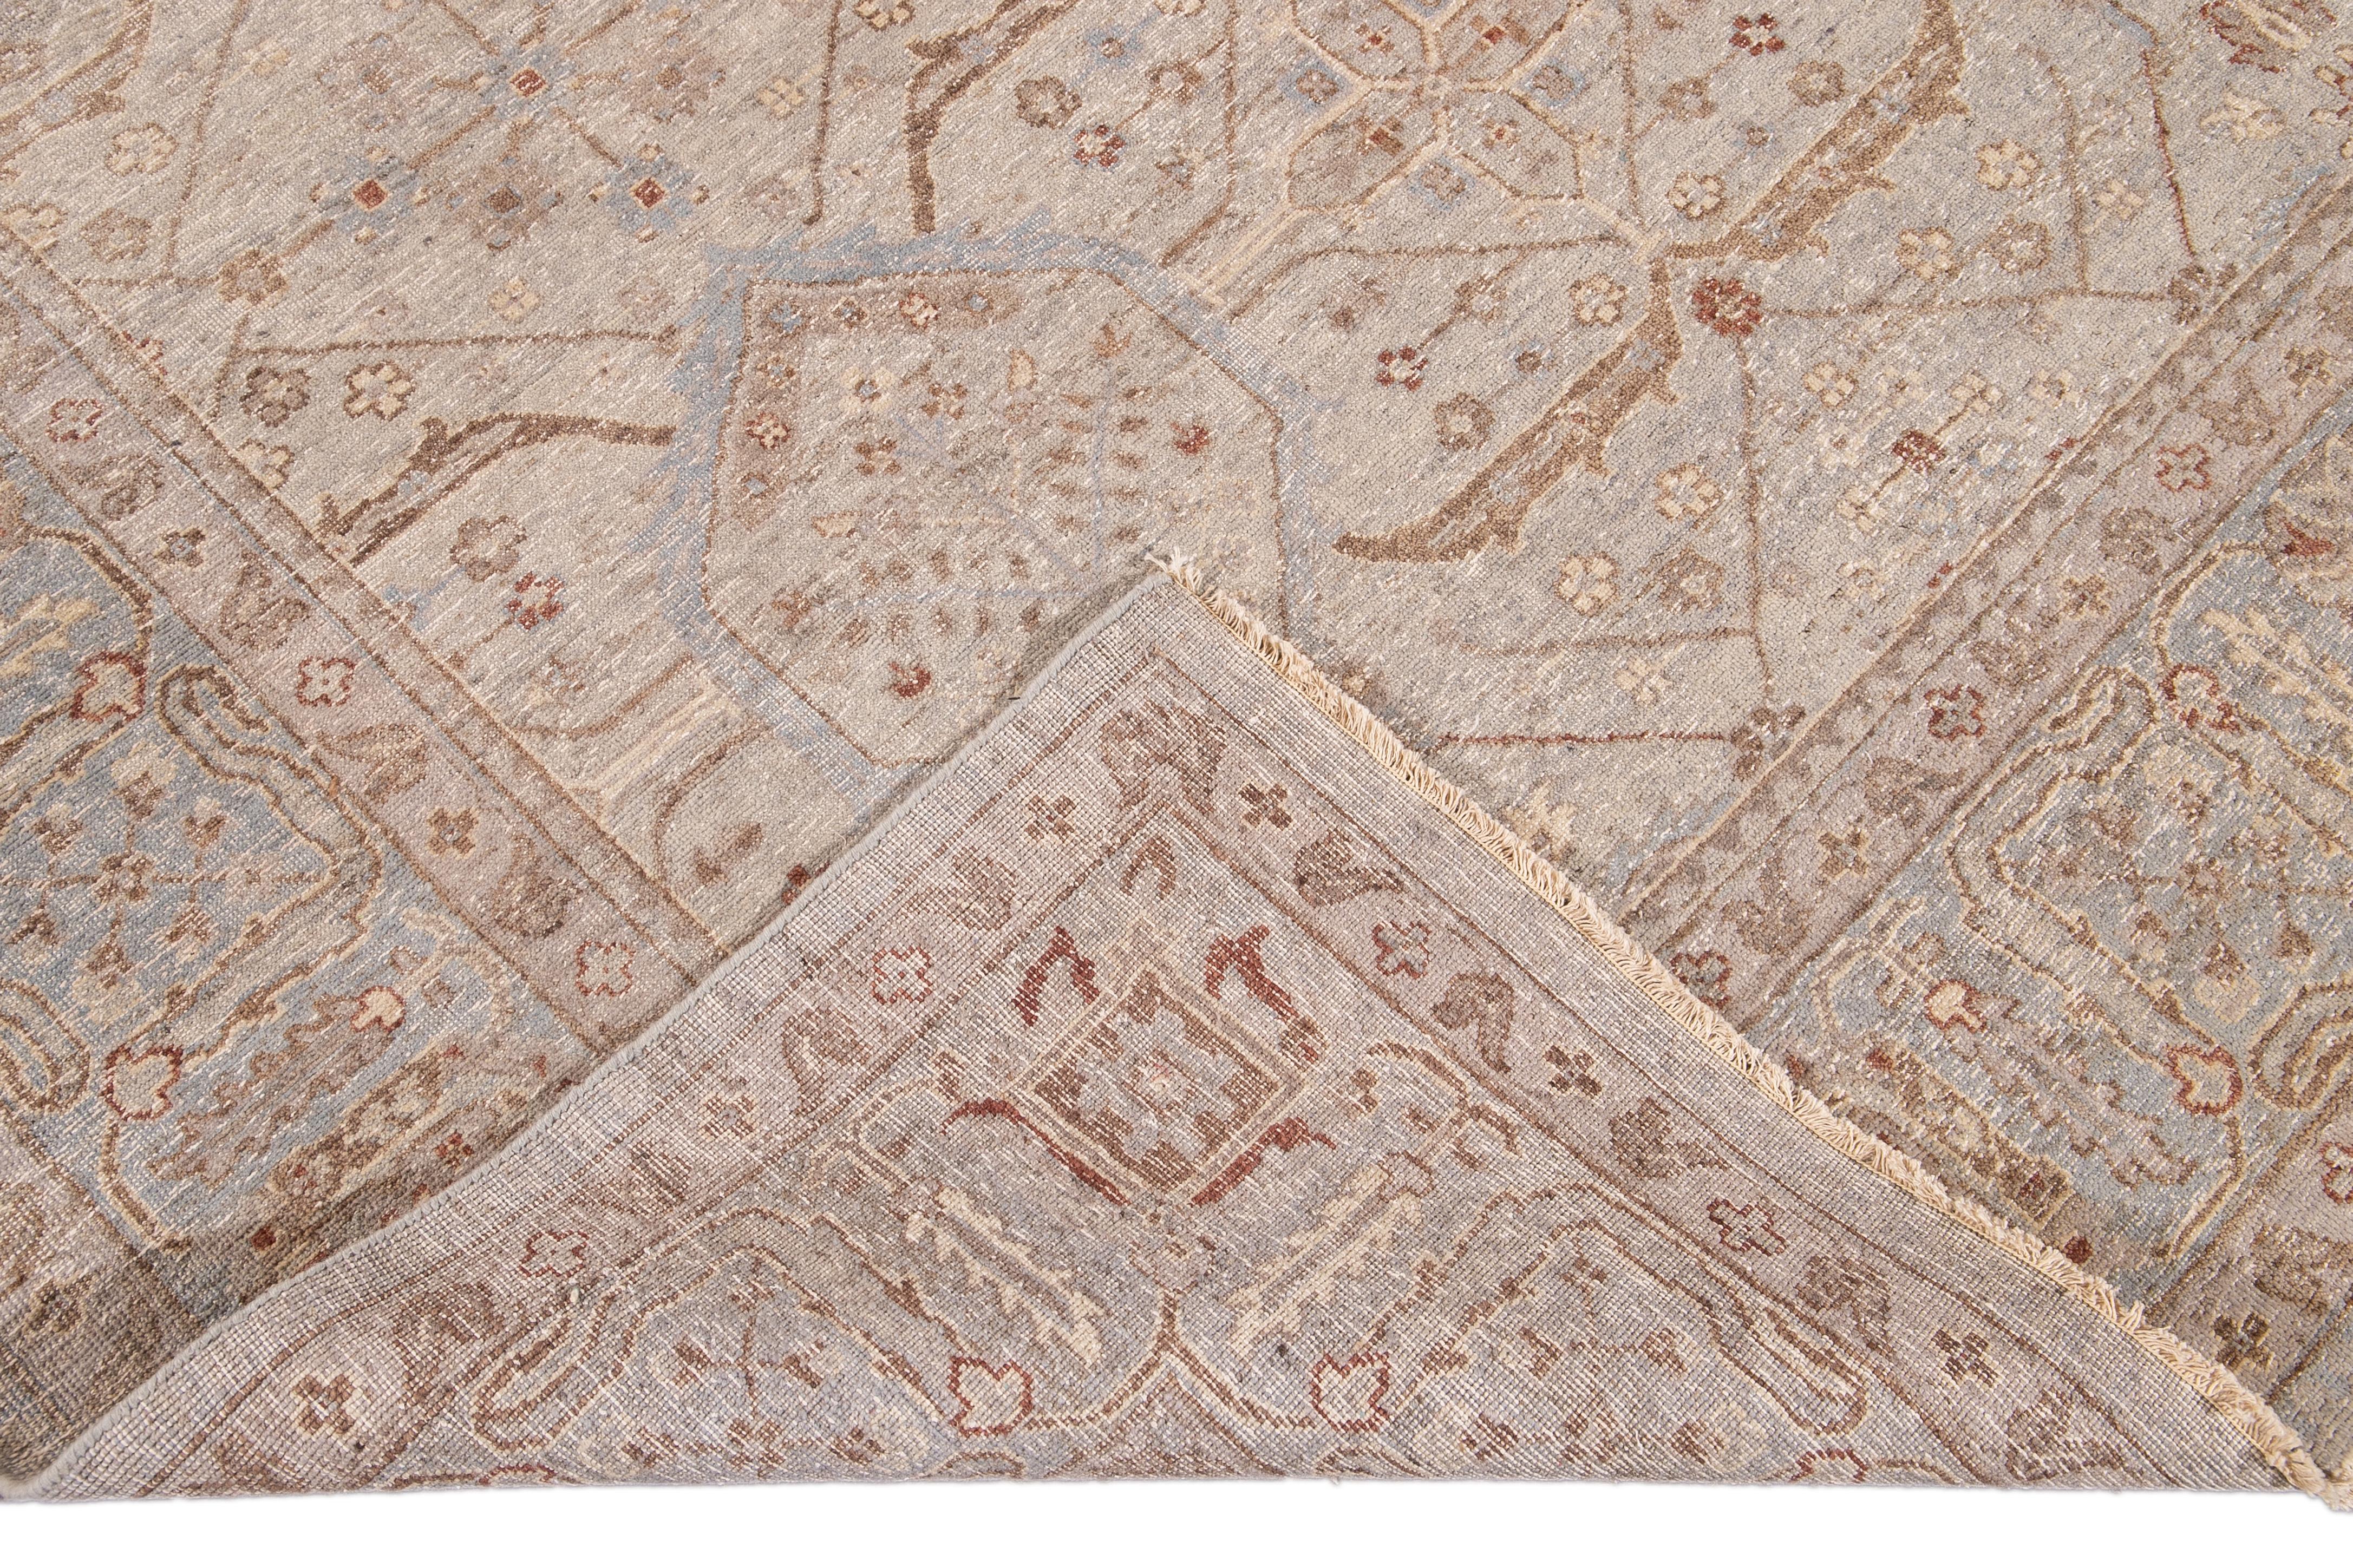 Beautiful modern square Khotan-style hand-knotted wool rug beige field. This Khotan-style rug has a blue frame and accent of blue, beige, and brown in a gorgeous all-over geometric floral design.

This rug measures: 10' x 10'2